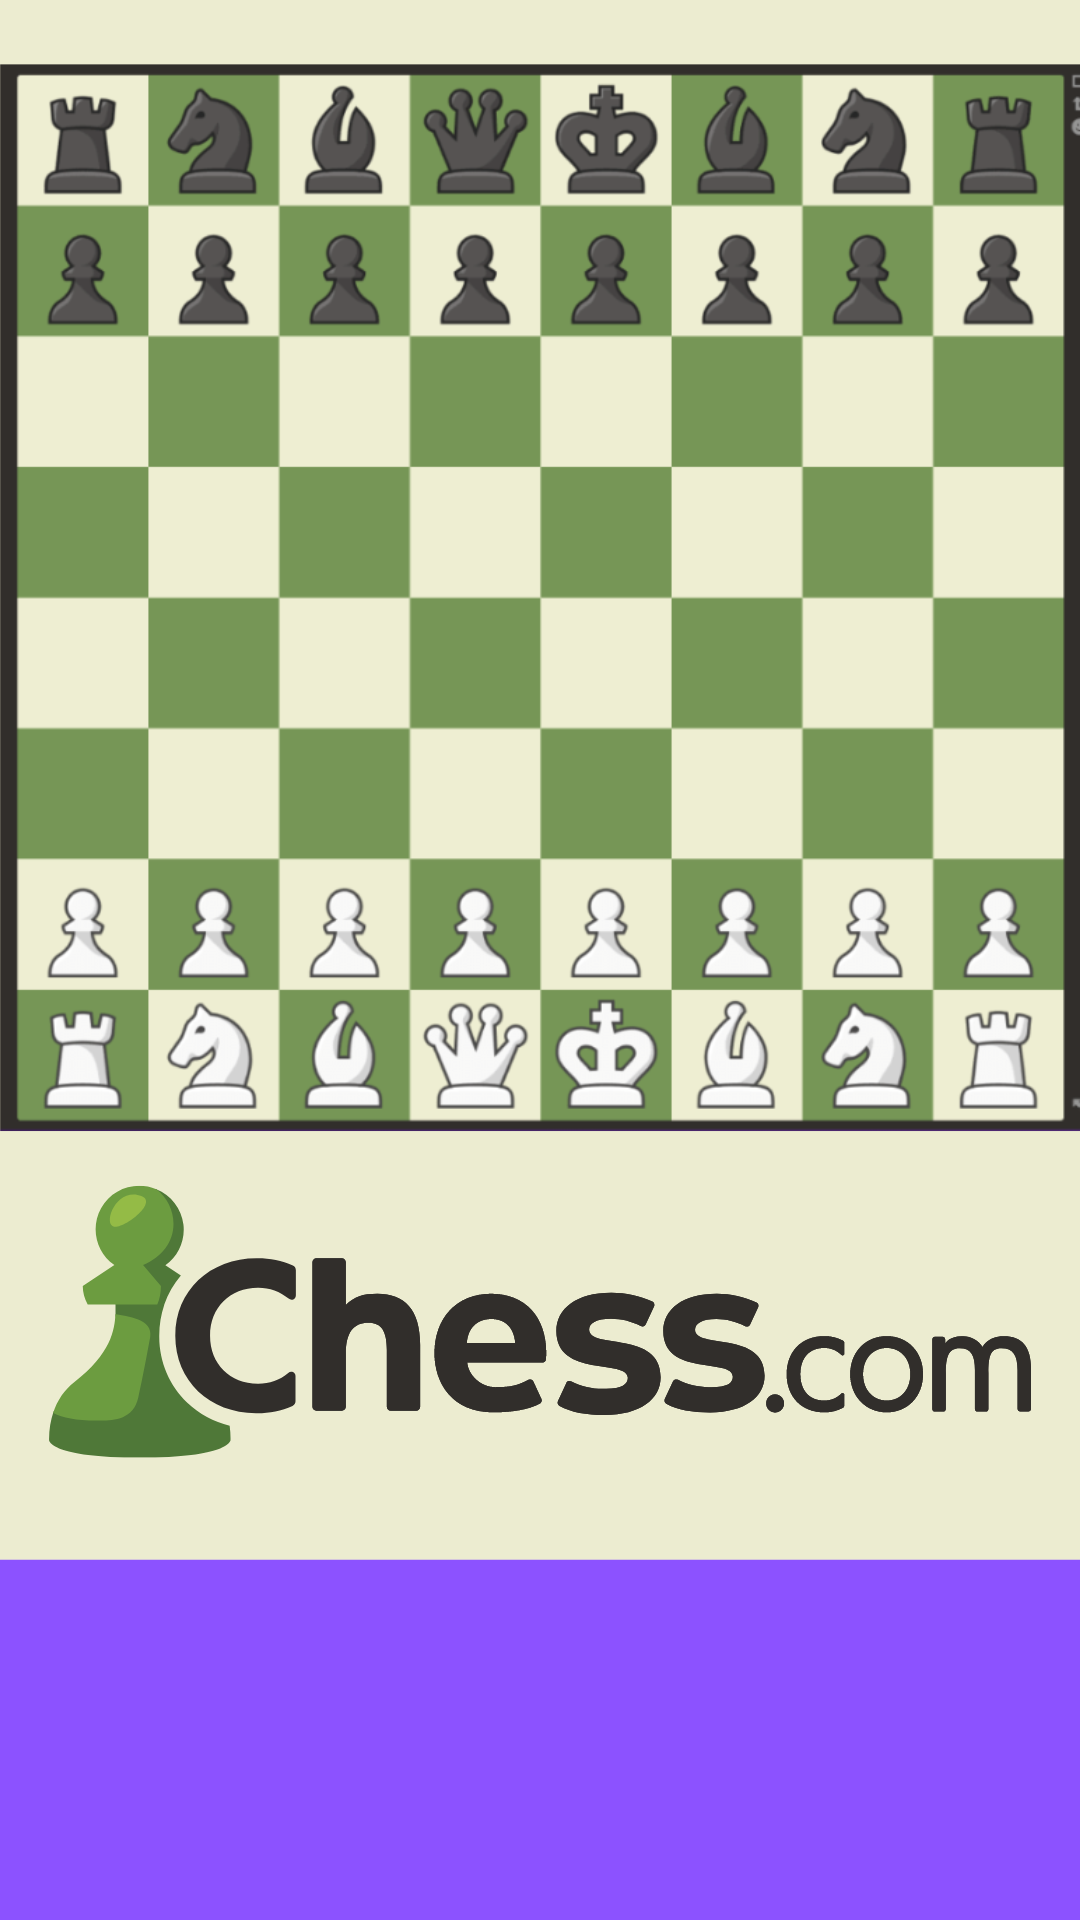 Chess.com Game Poster